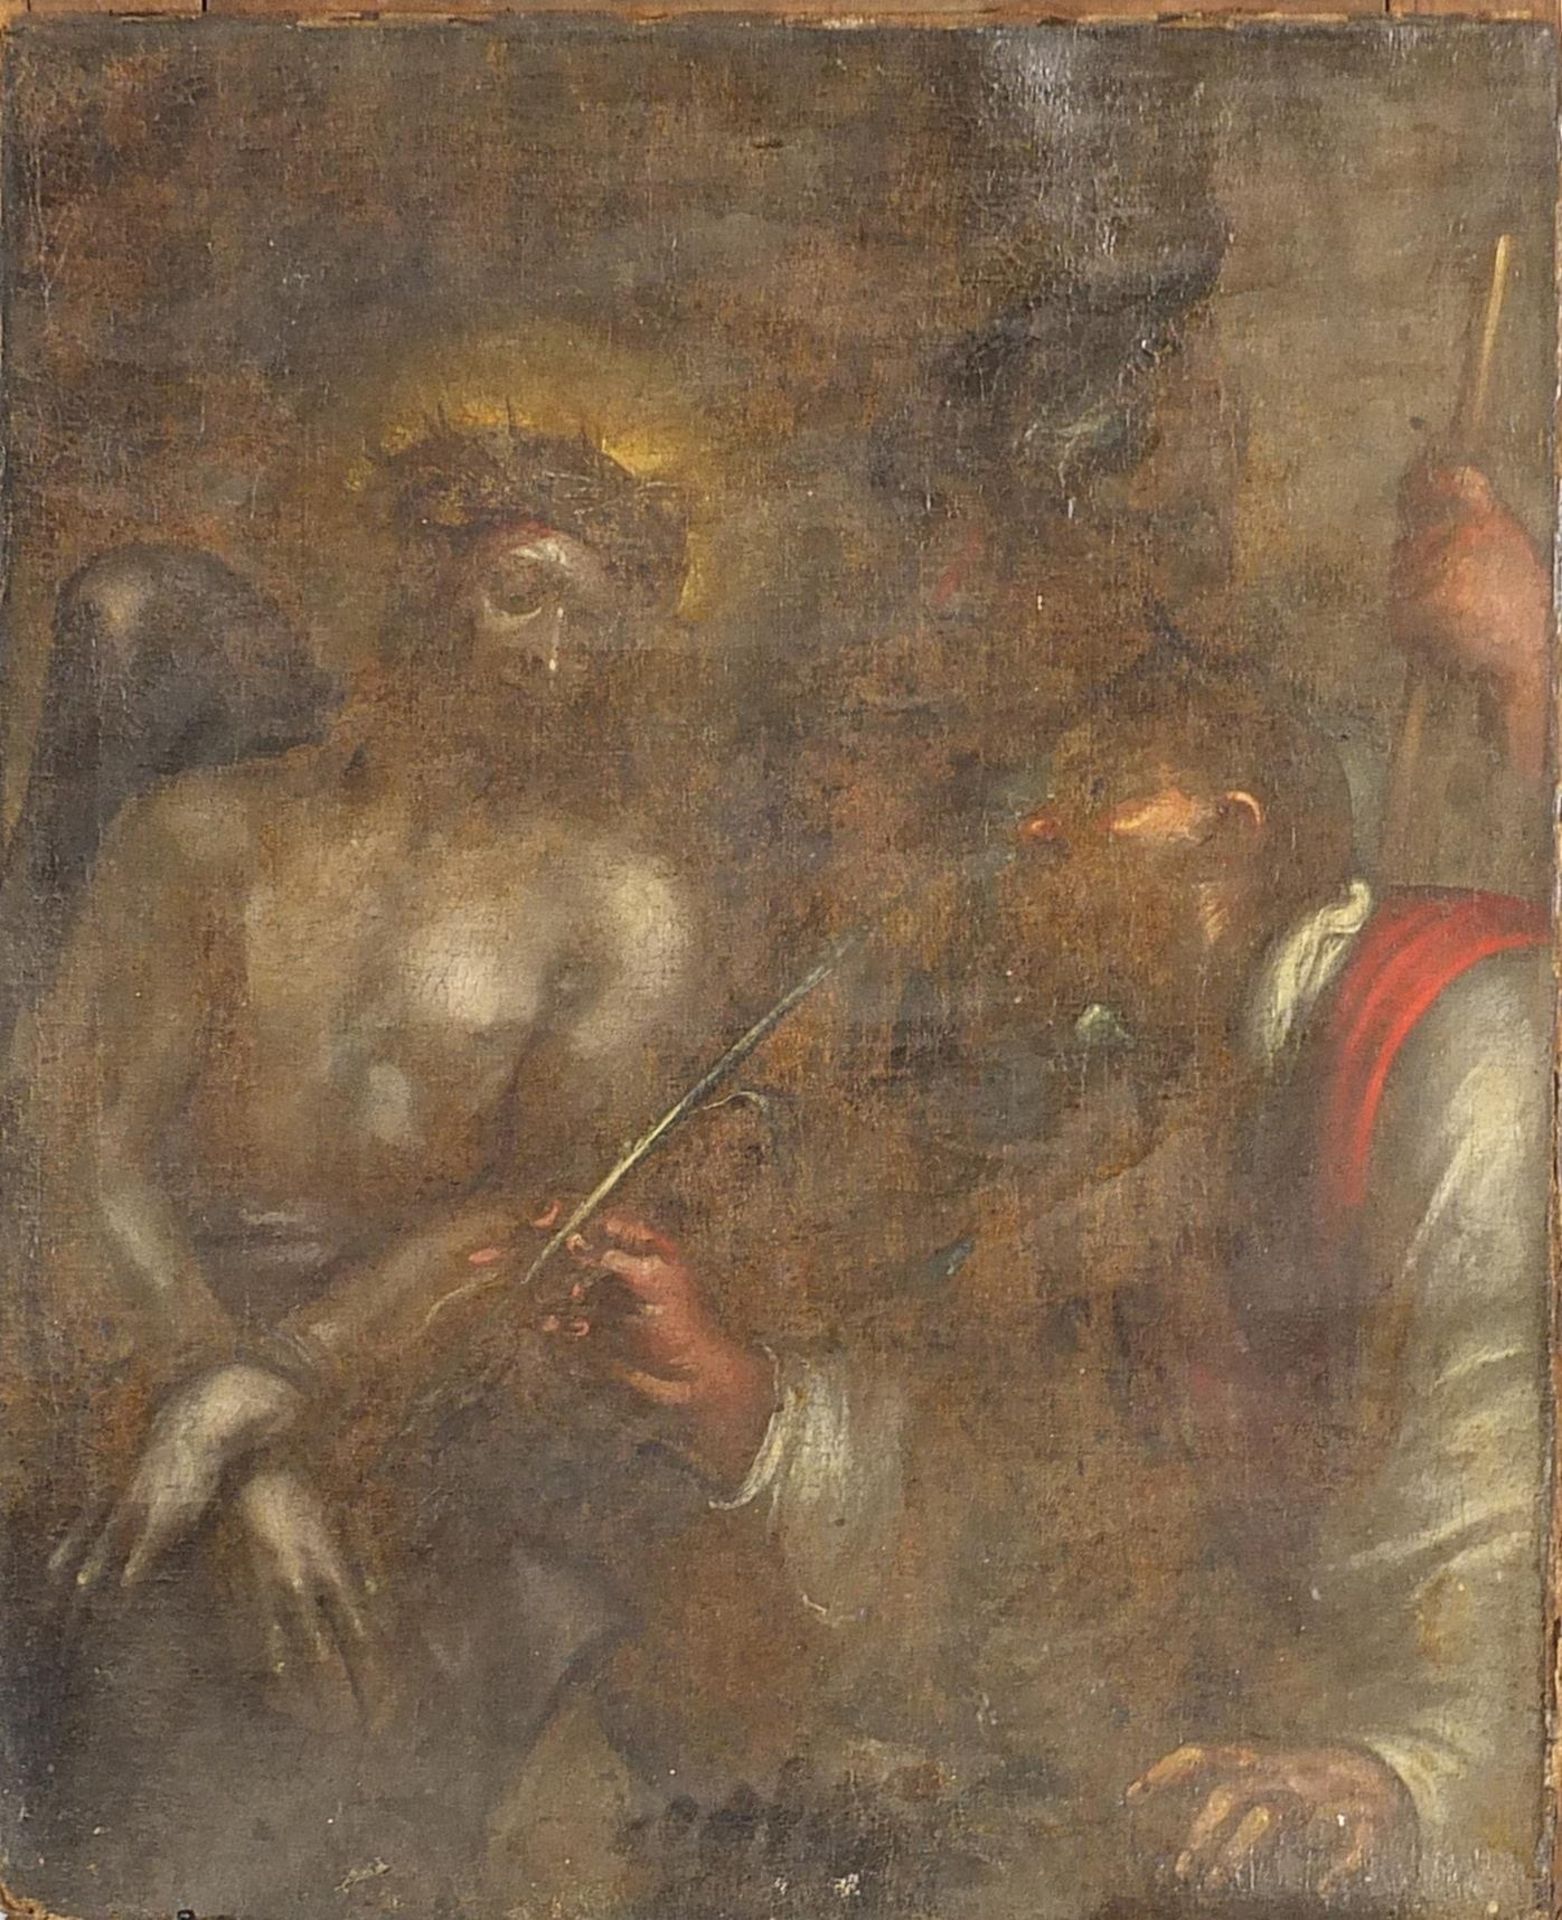 Christ with attendants, 17th/18th century Flemish Old Master, oil on unstretched canvas, 84cm x 69cm